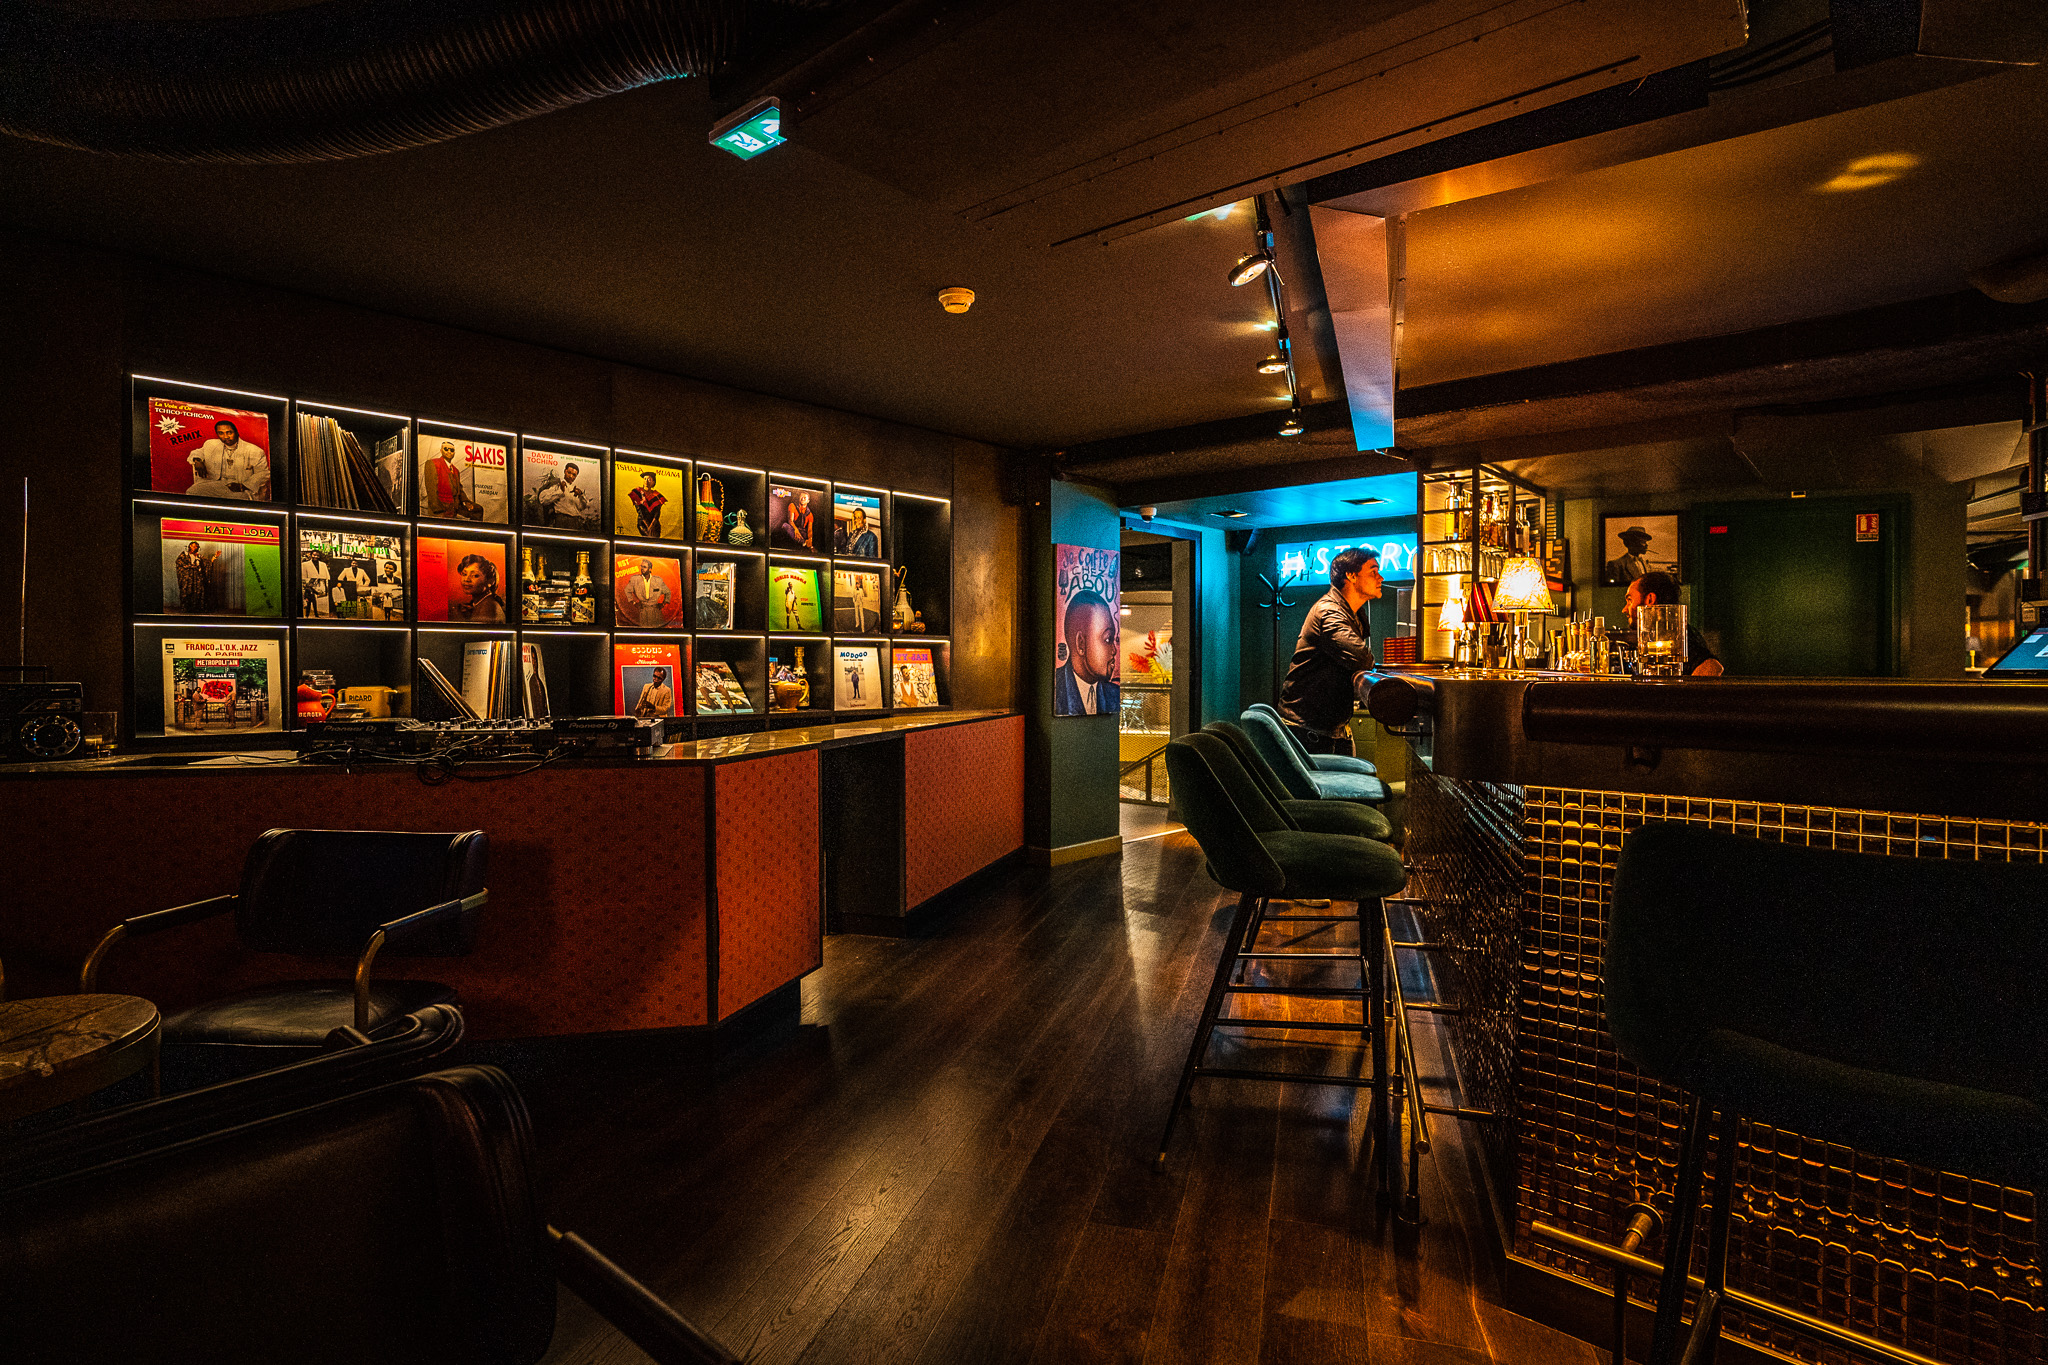 The interior of the Sape Bar, with a DJ booth and several records on the wall as well as a bounter with bar stools